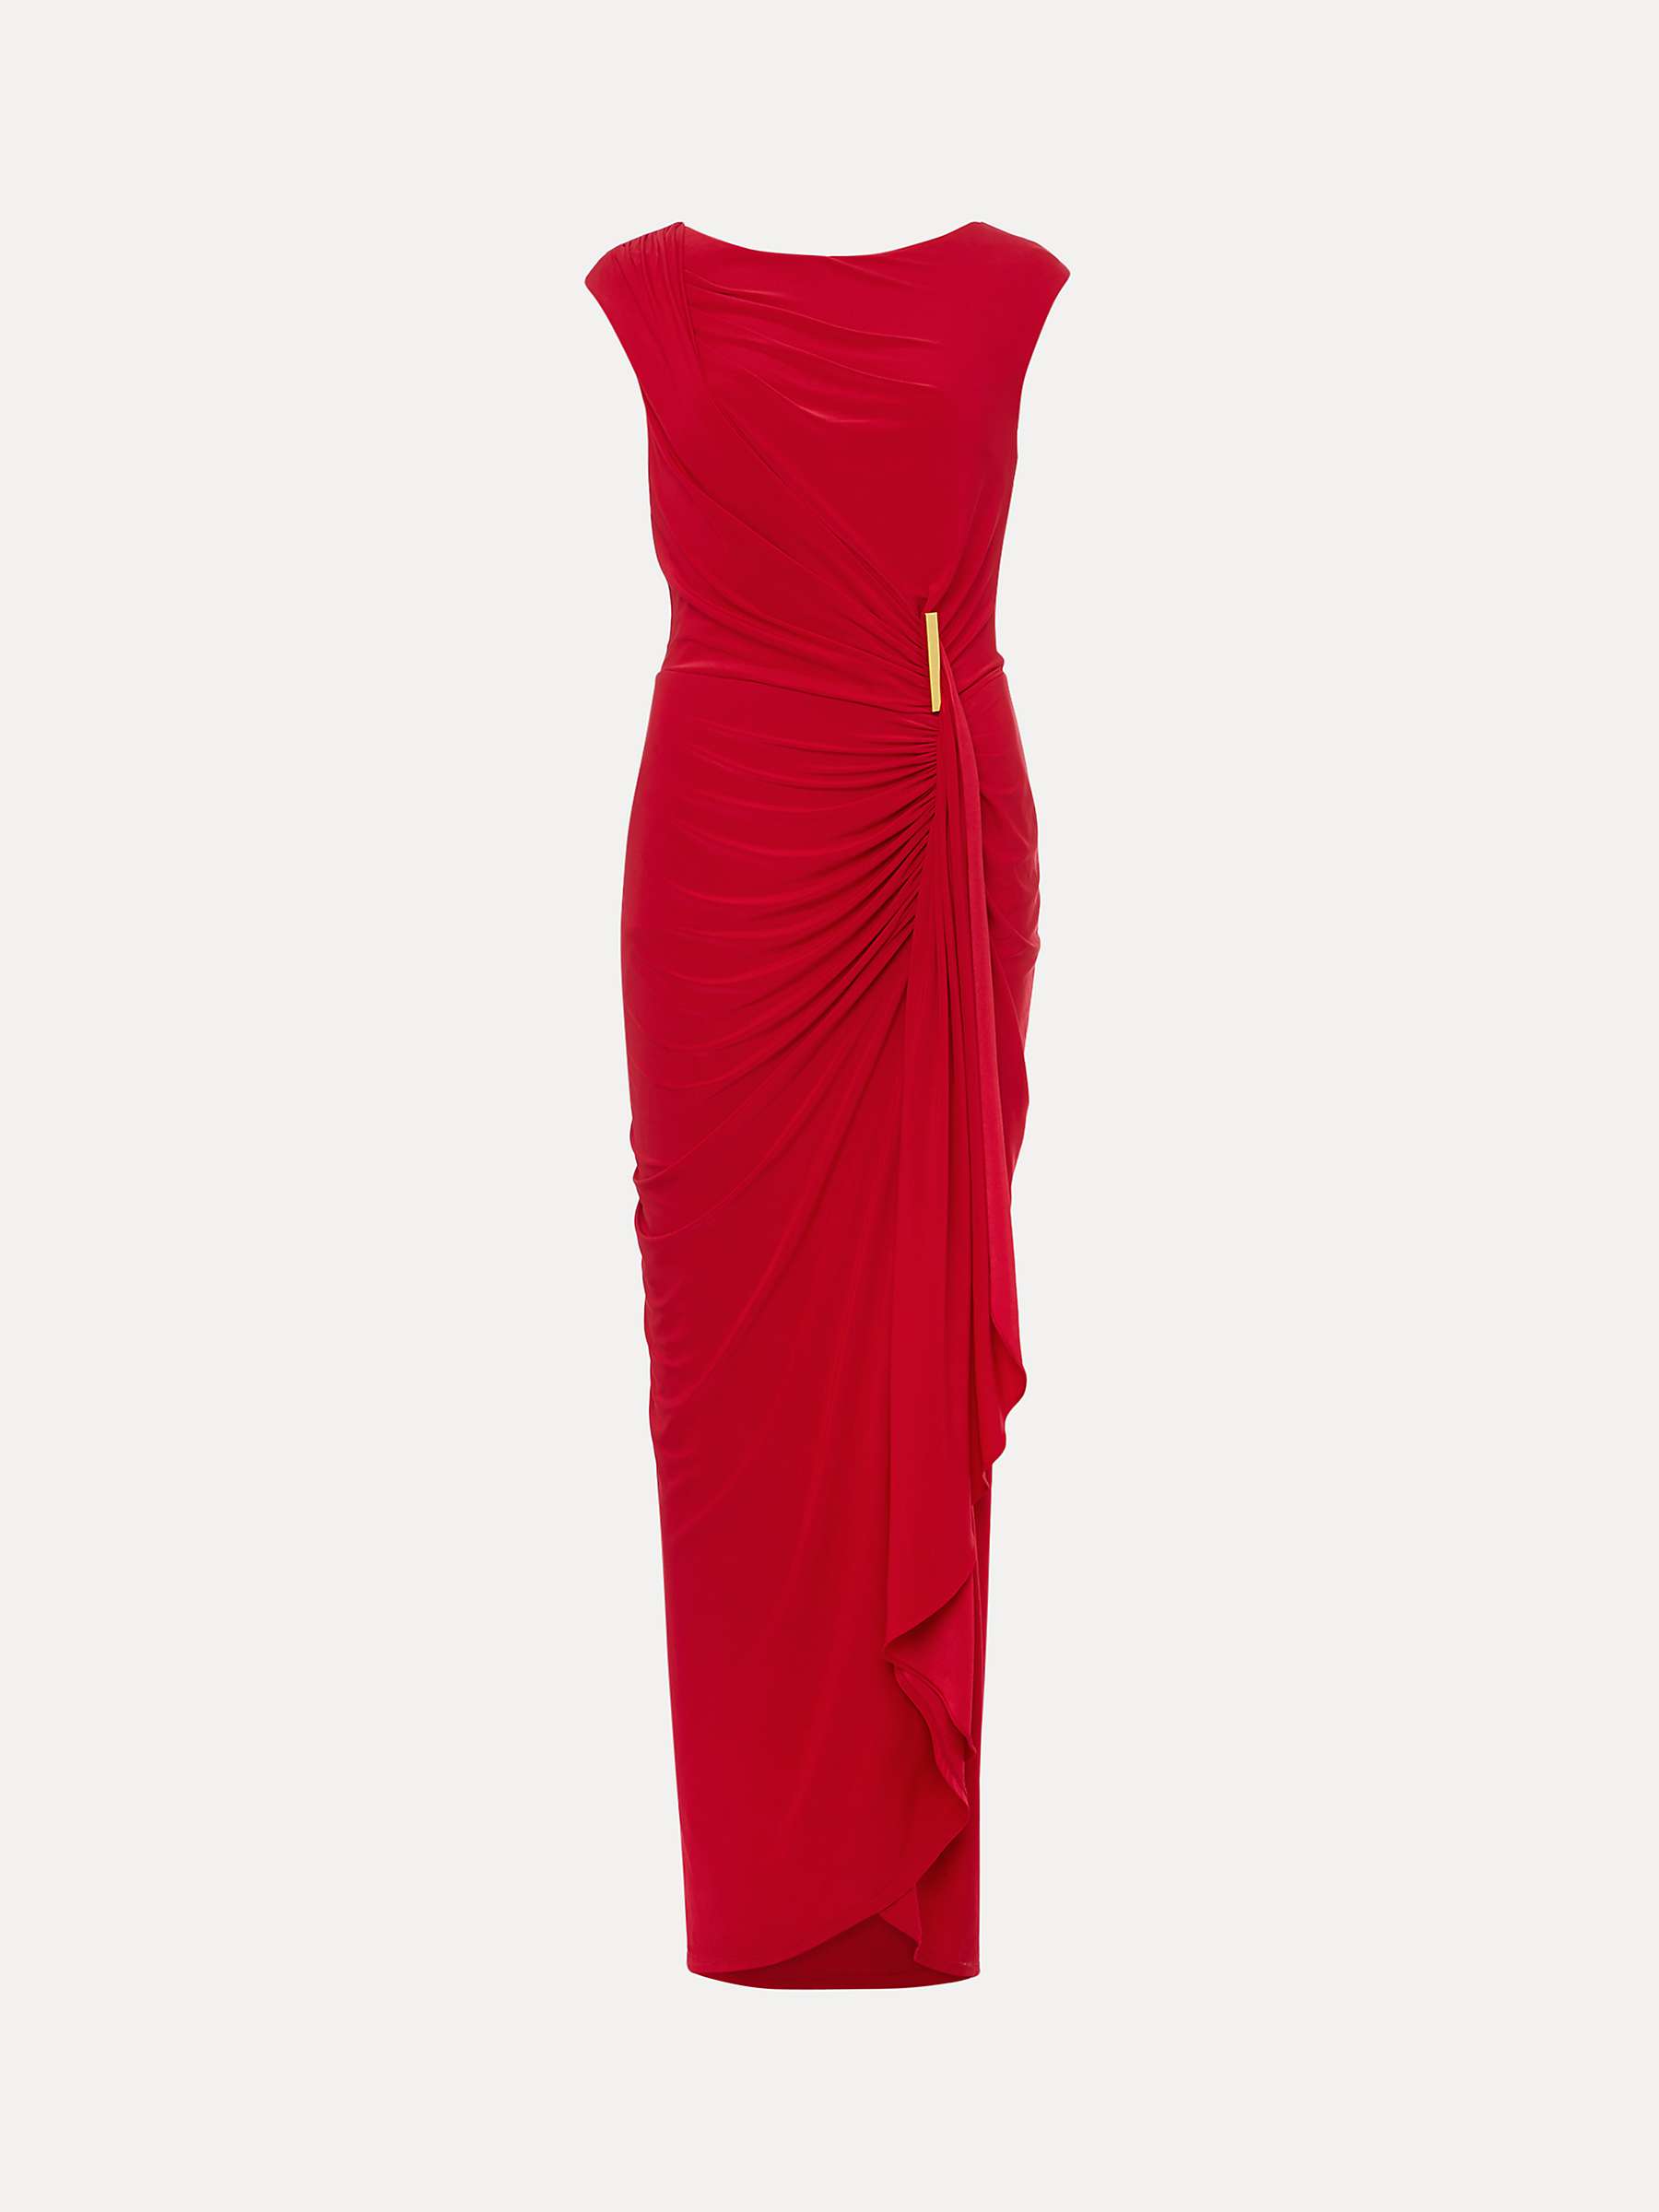 Phase Eight Donna Maxi Dress, Scarlet at John Lewis & Partners